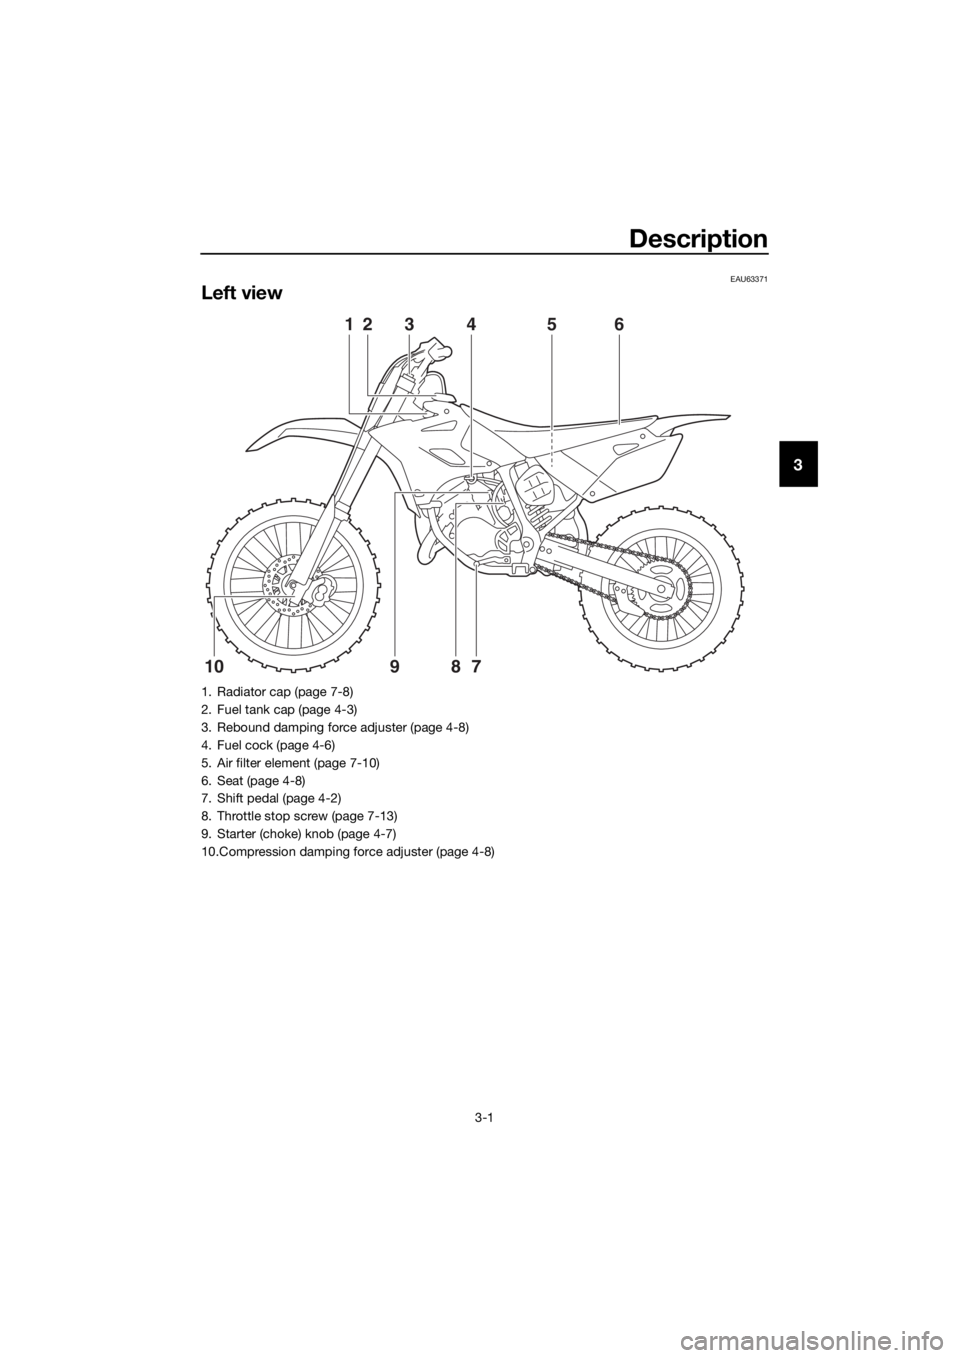 YAMAHA YZ85 2018  Owners Manual Description
3-1
3
EAU63371
Left view
12789
10 4
356
1. Radiator cap (page 7-8)
2. Fuel tank cap (page 4-3)
3. Rebound damping force adjuster (page 4-8)
4. Fuel cock (page 4-6)
5. Air filter element (p